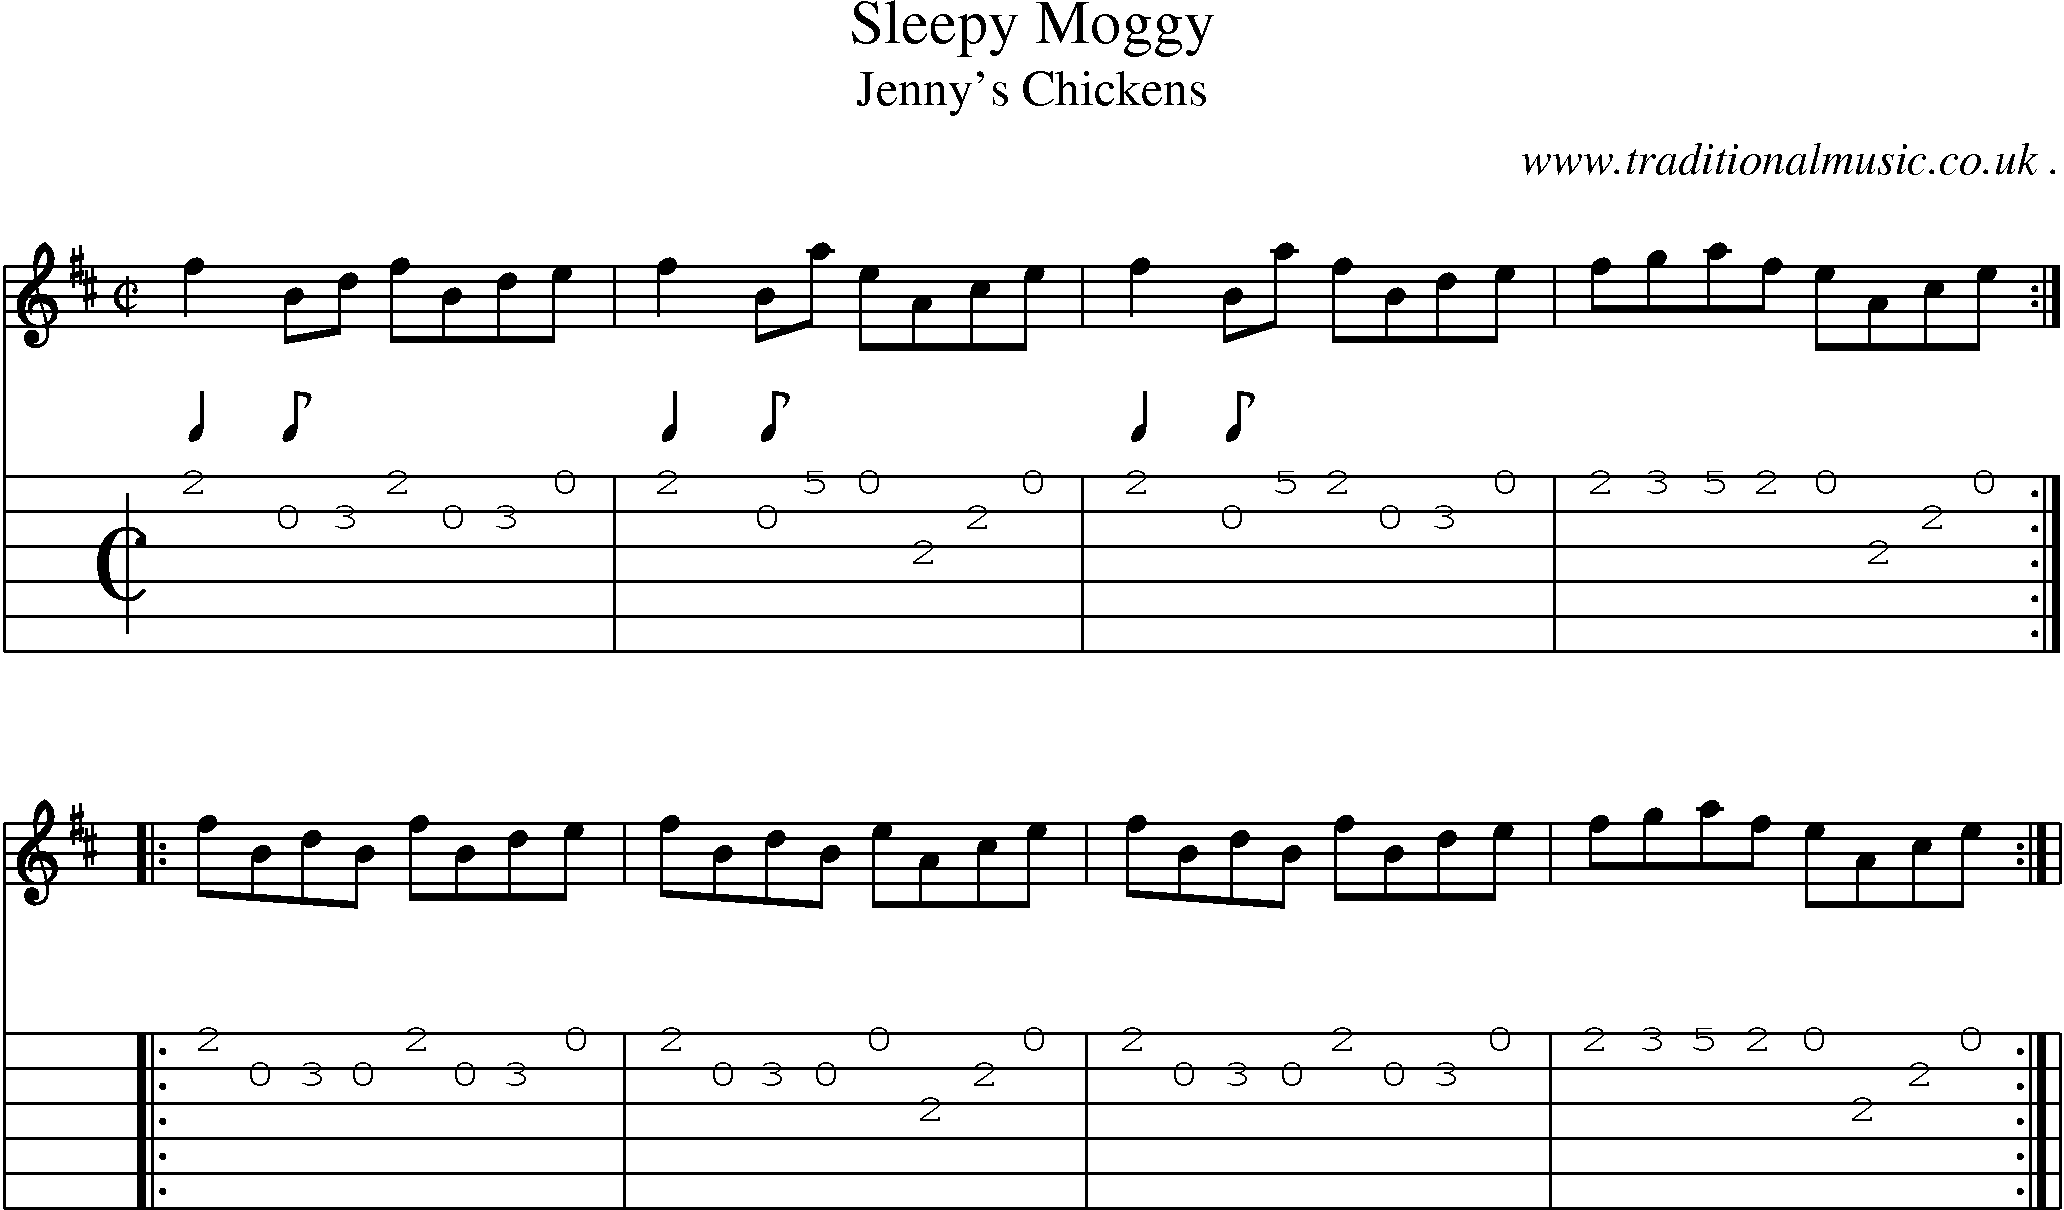 Sheet-Music and Guitar Tabs for Sleepy Moggy